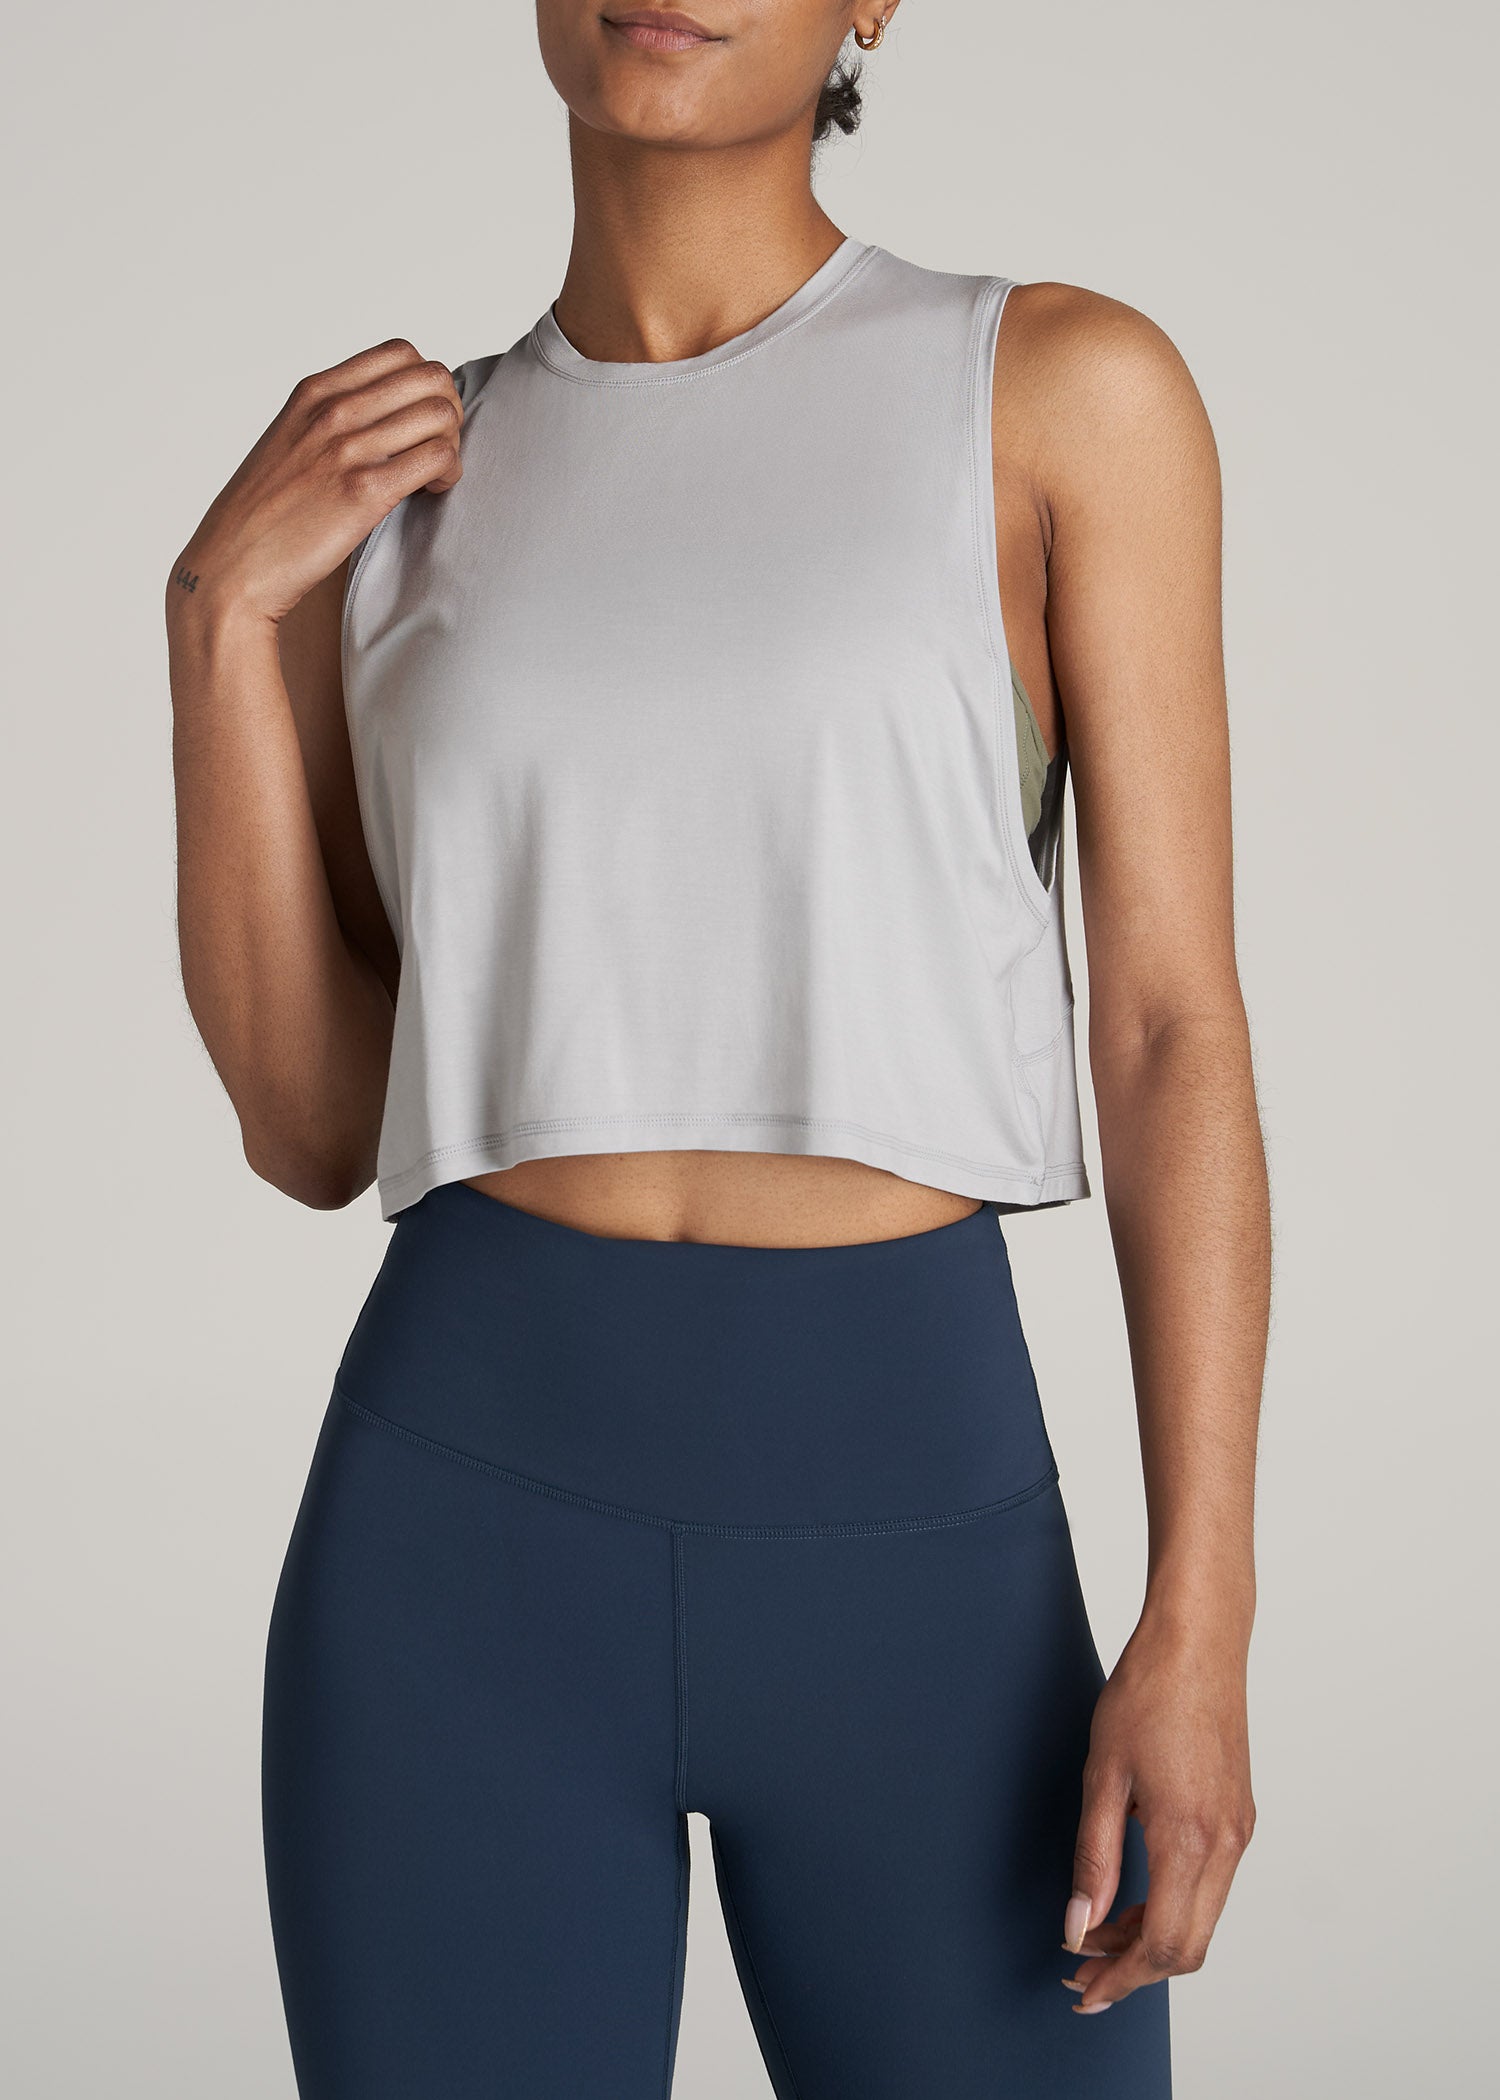 Get The Perfect & Smallest Crop For Your Sweater, Sliver Crop Top